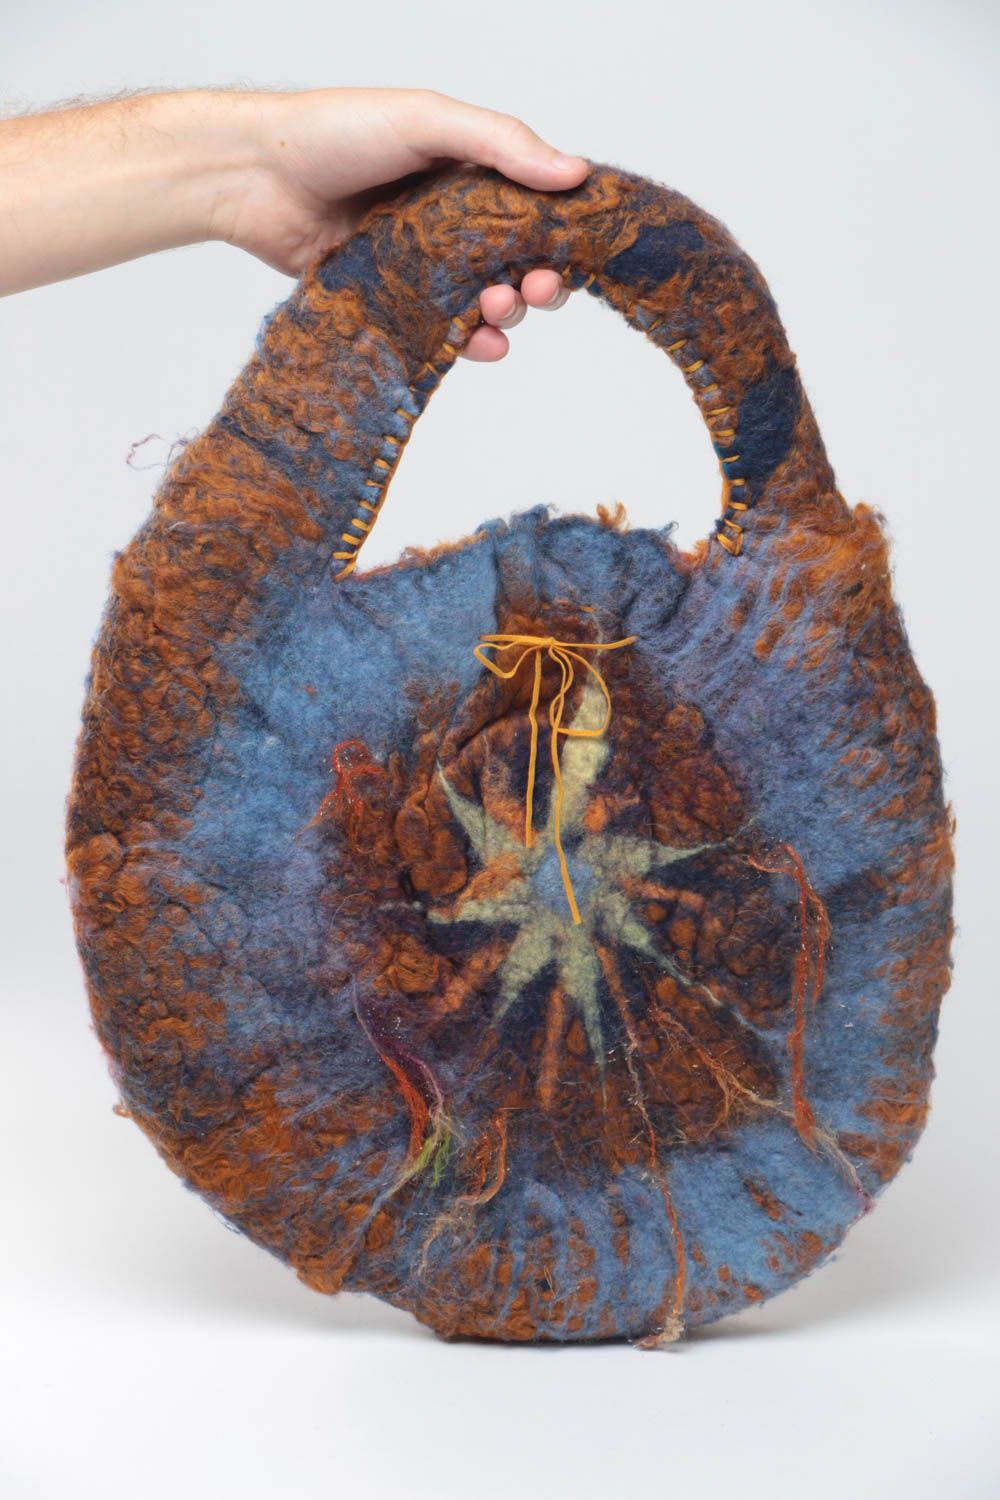 Handmade designer women's bag felted of natural wool in blue and brown colors photo 5